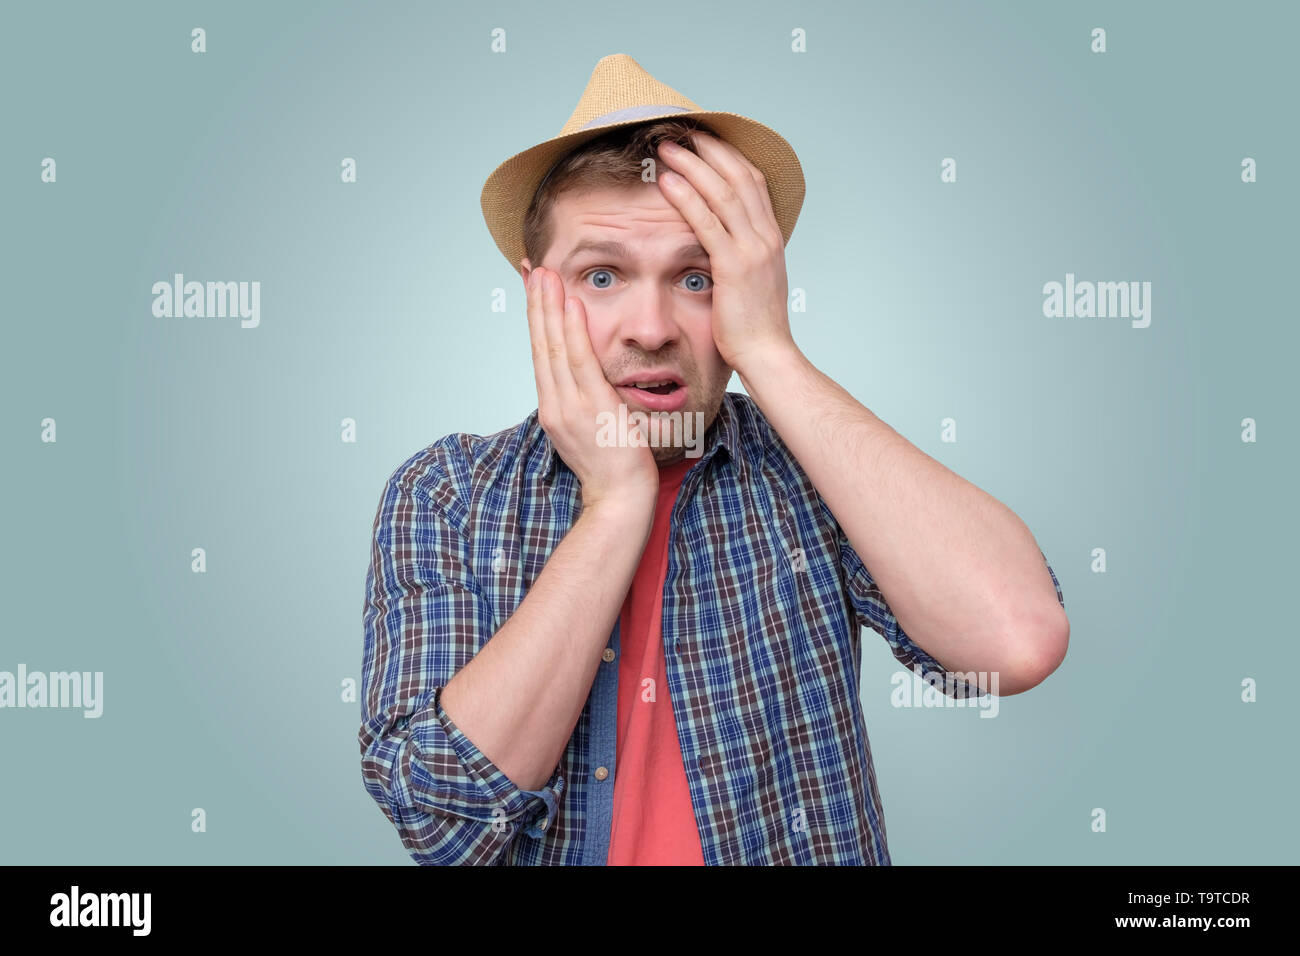 Young man puts hand to face in shame and frustration. Stock Photo